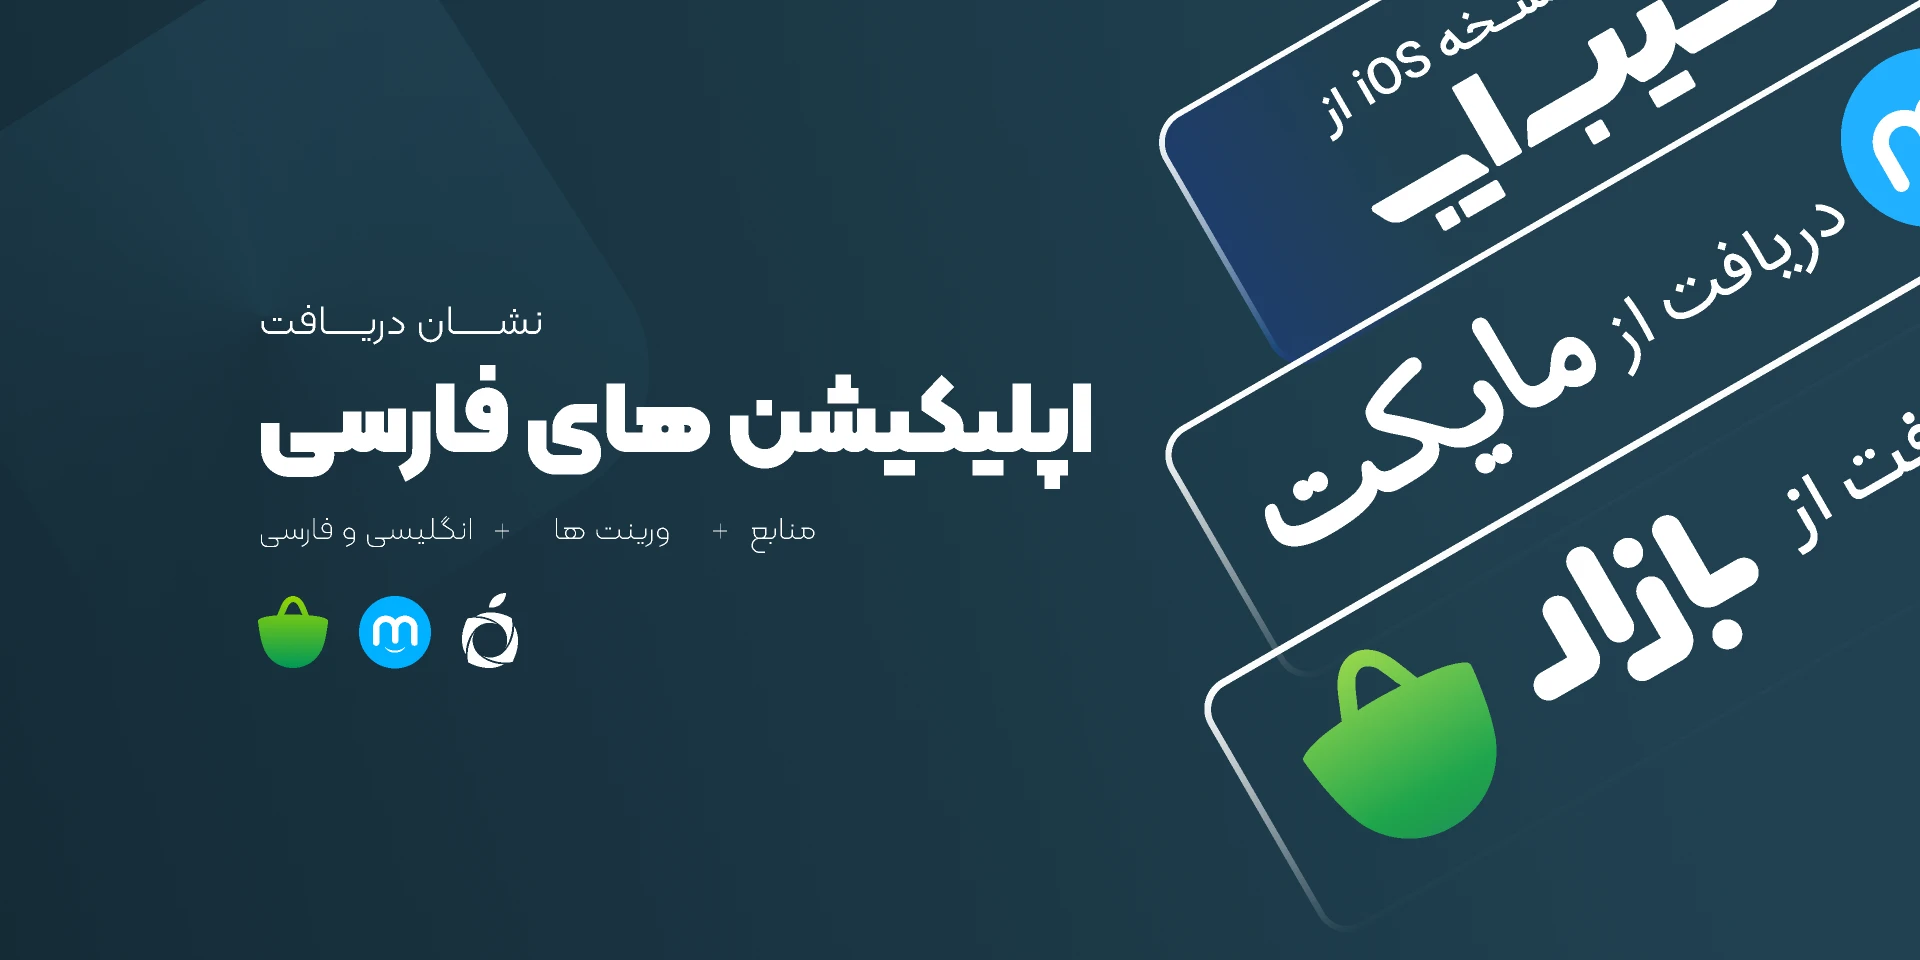 Download the Iranian application for Figma and Adobe XD